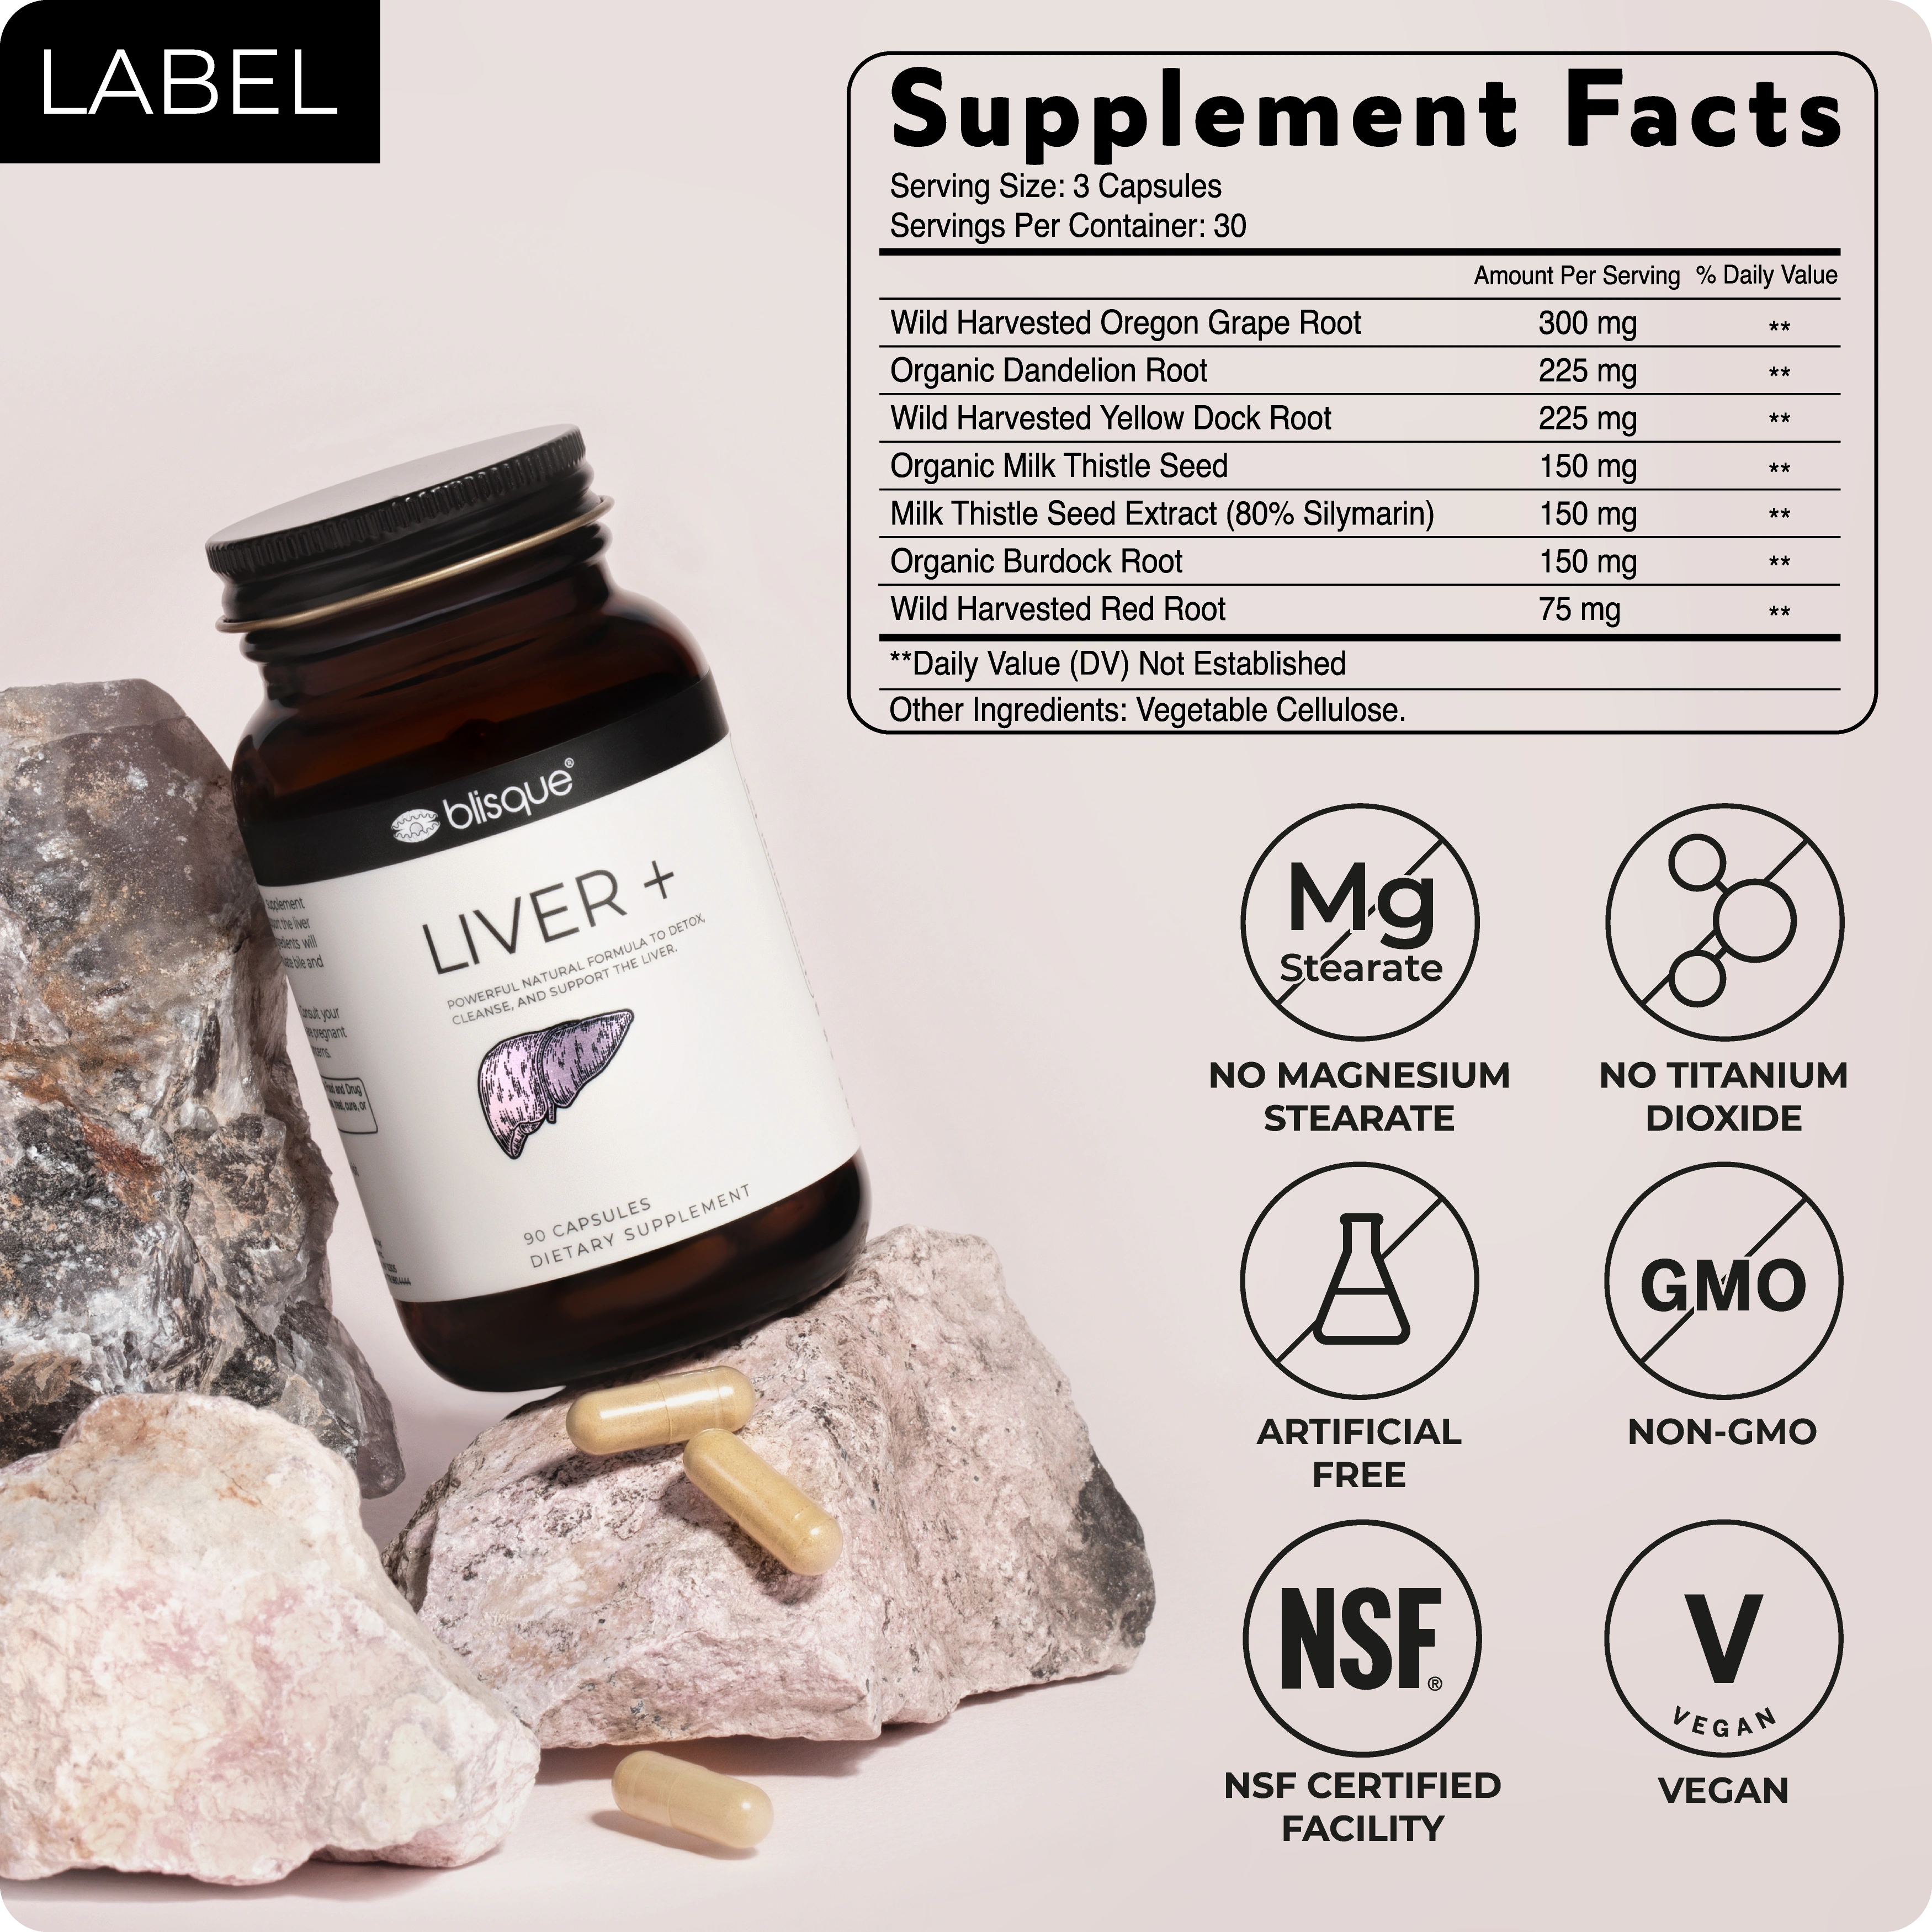 bottle on rocks with supplement facts